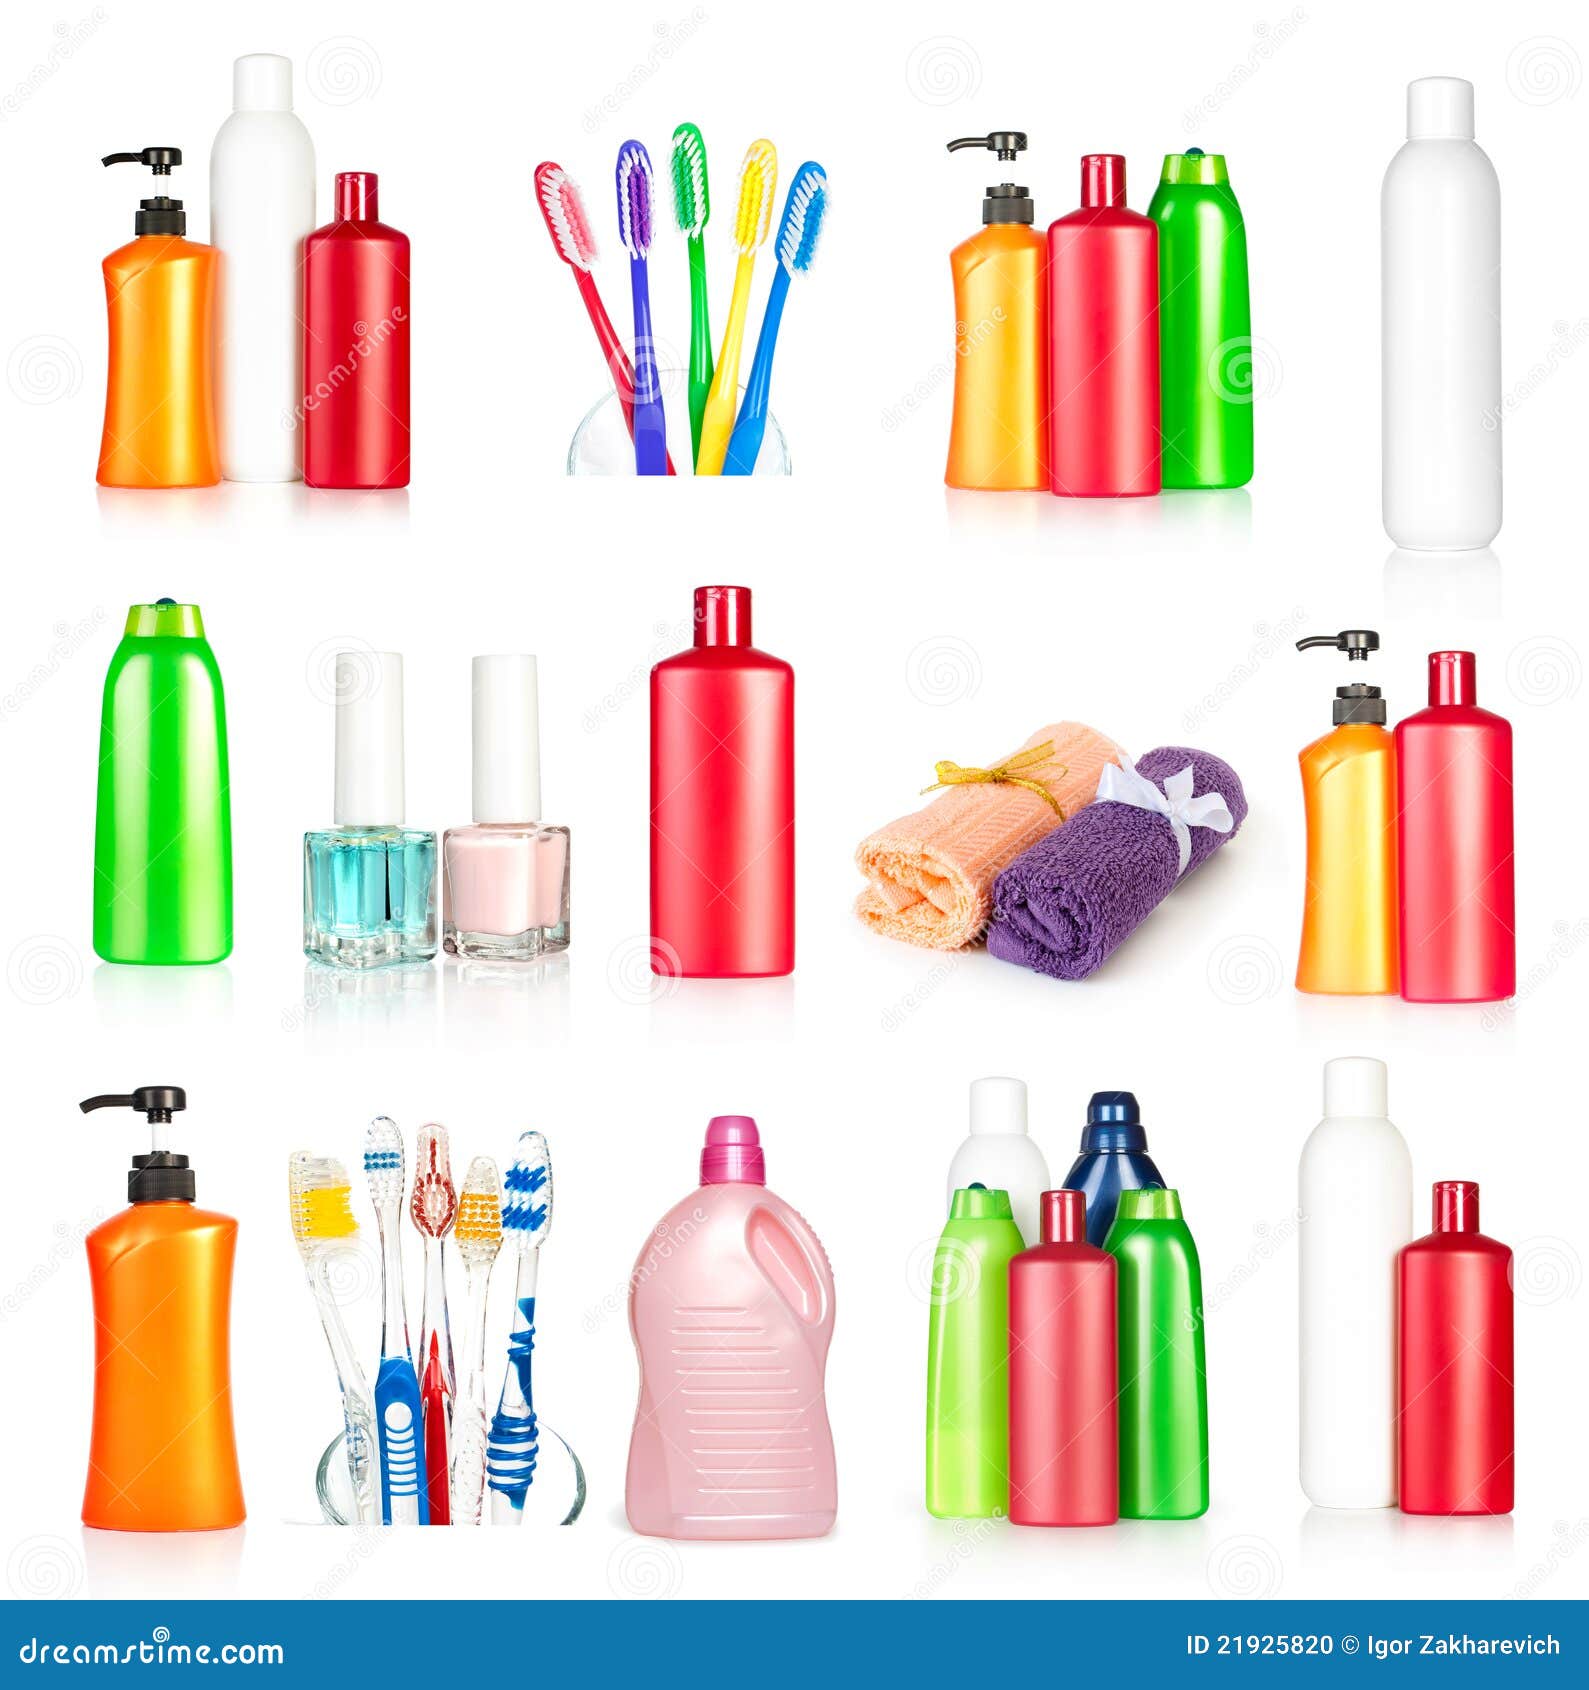 bottles shampoo, towels, toothbrushes and nail pol